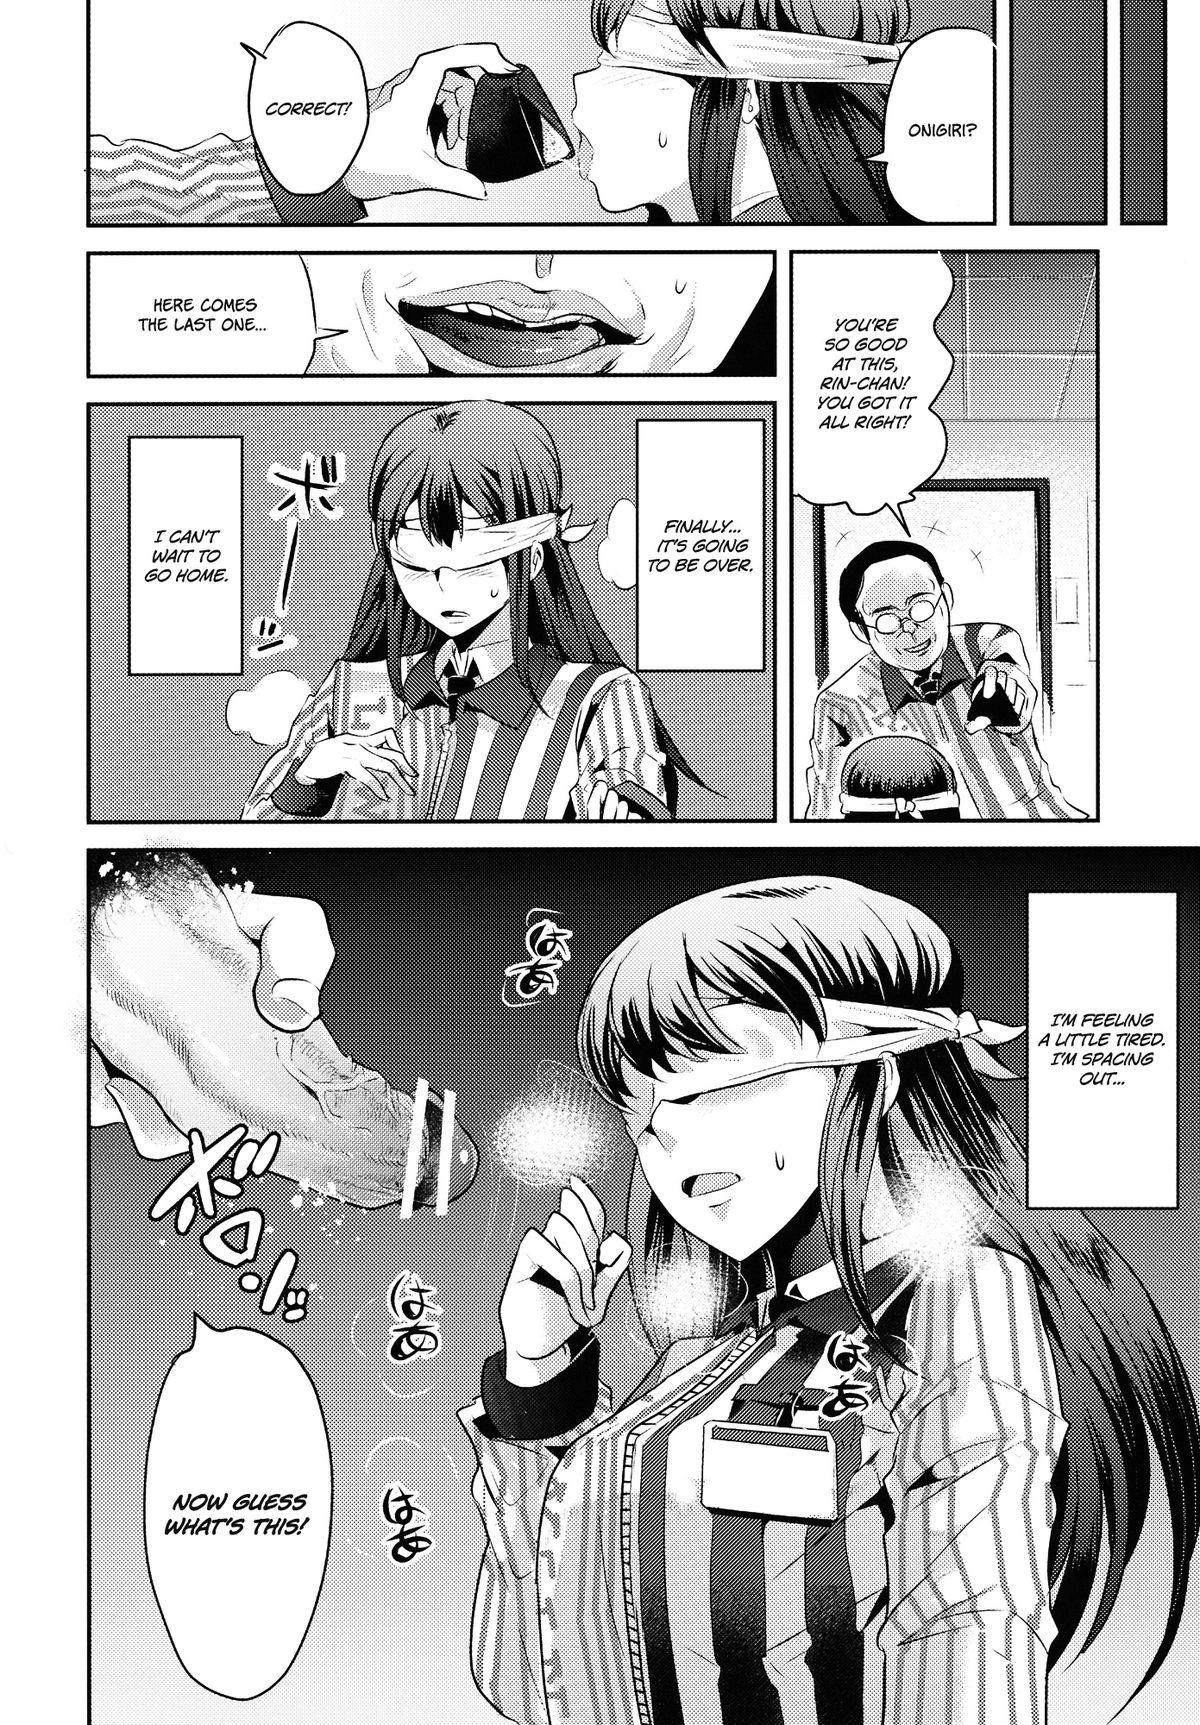 Foreplay Lawson Tenin Rin-chan - The idolmaster Suck Cock - Page 6